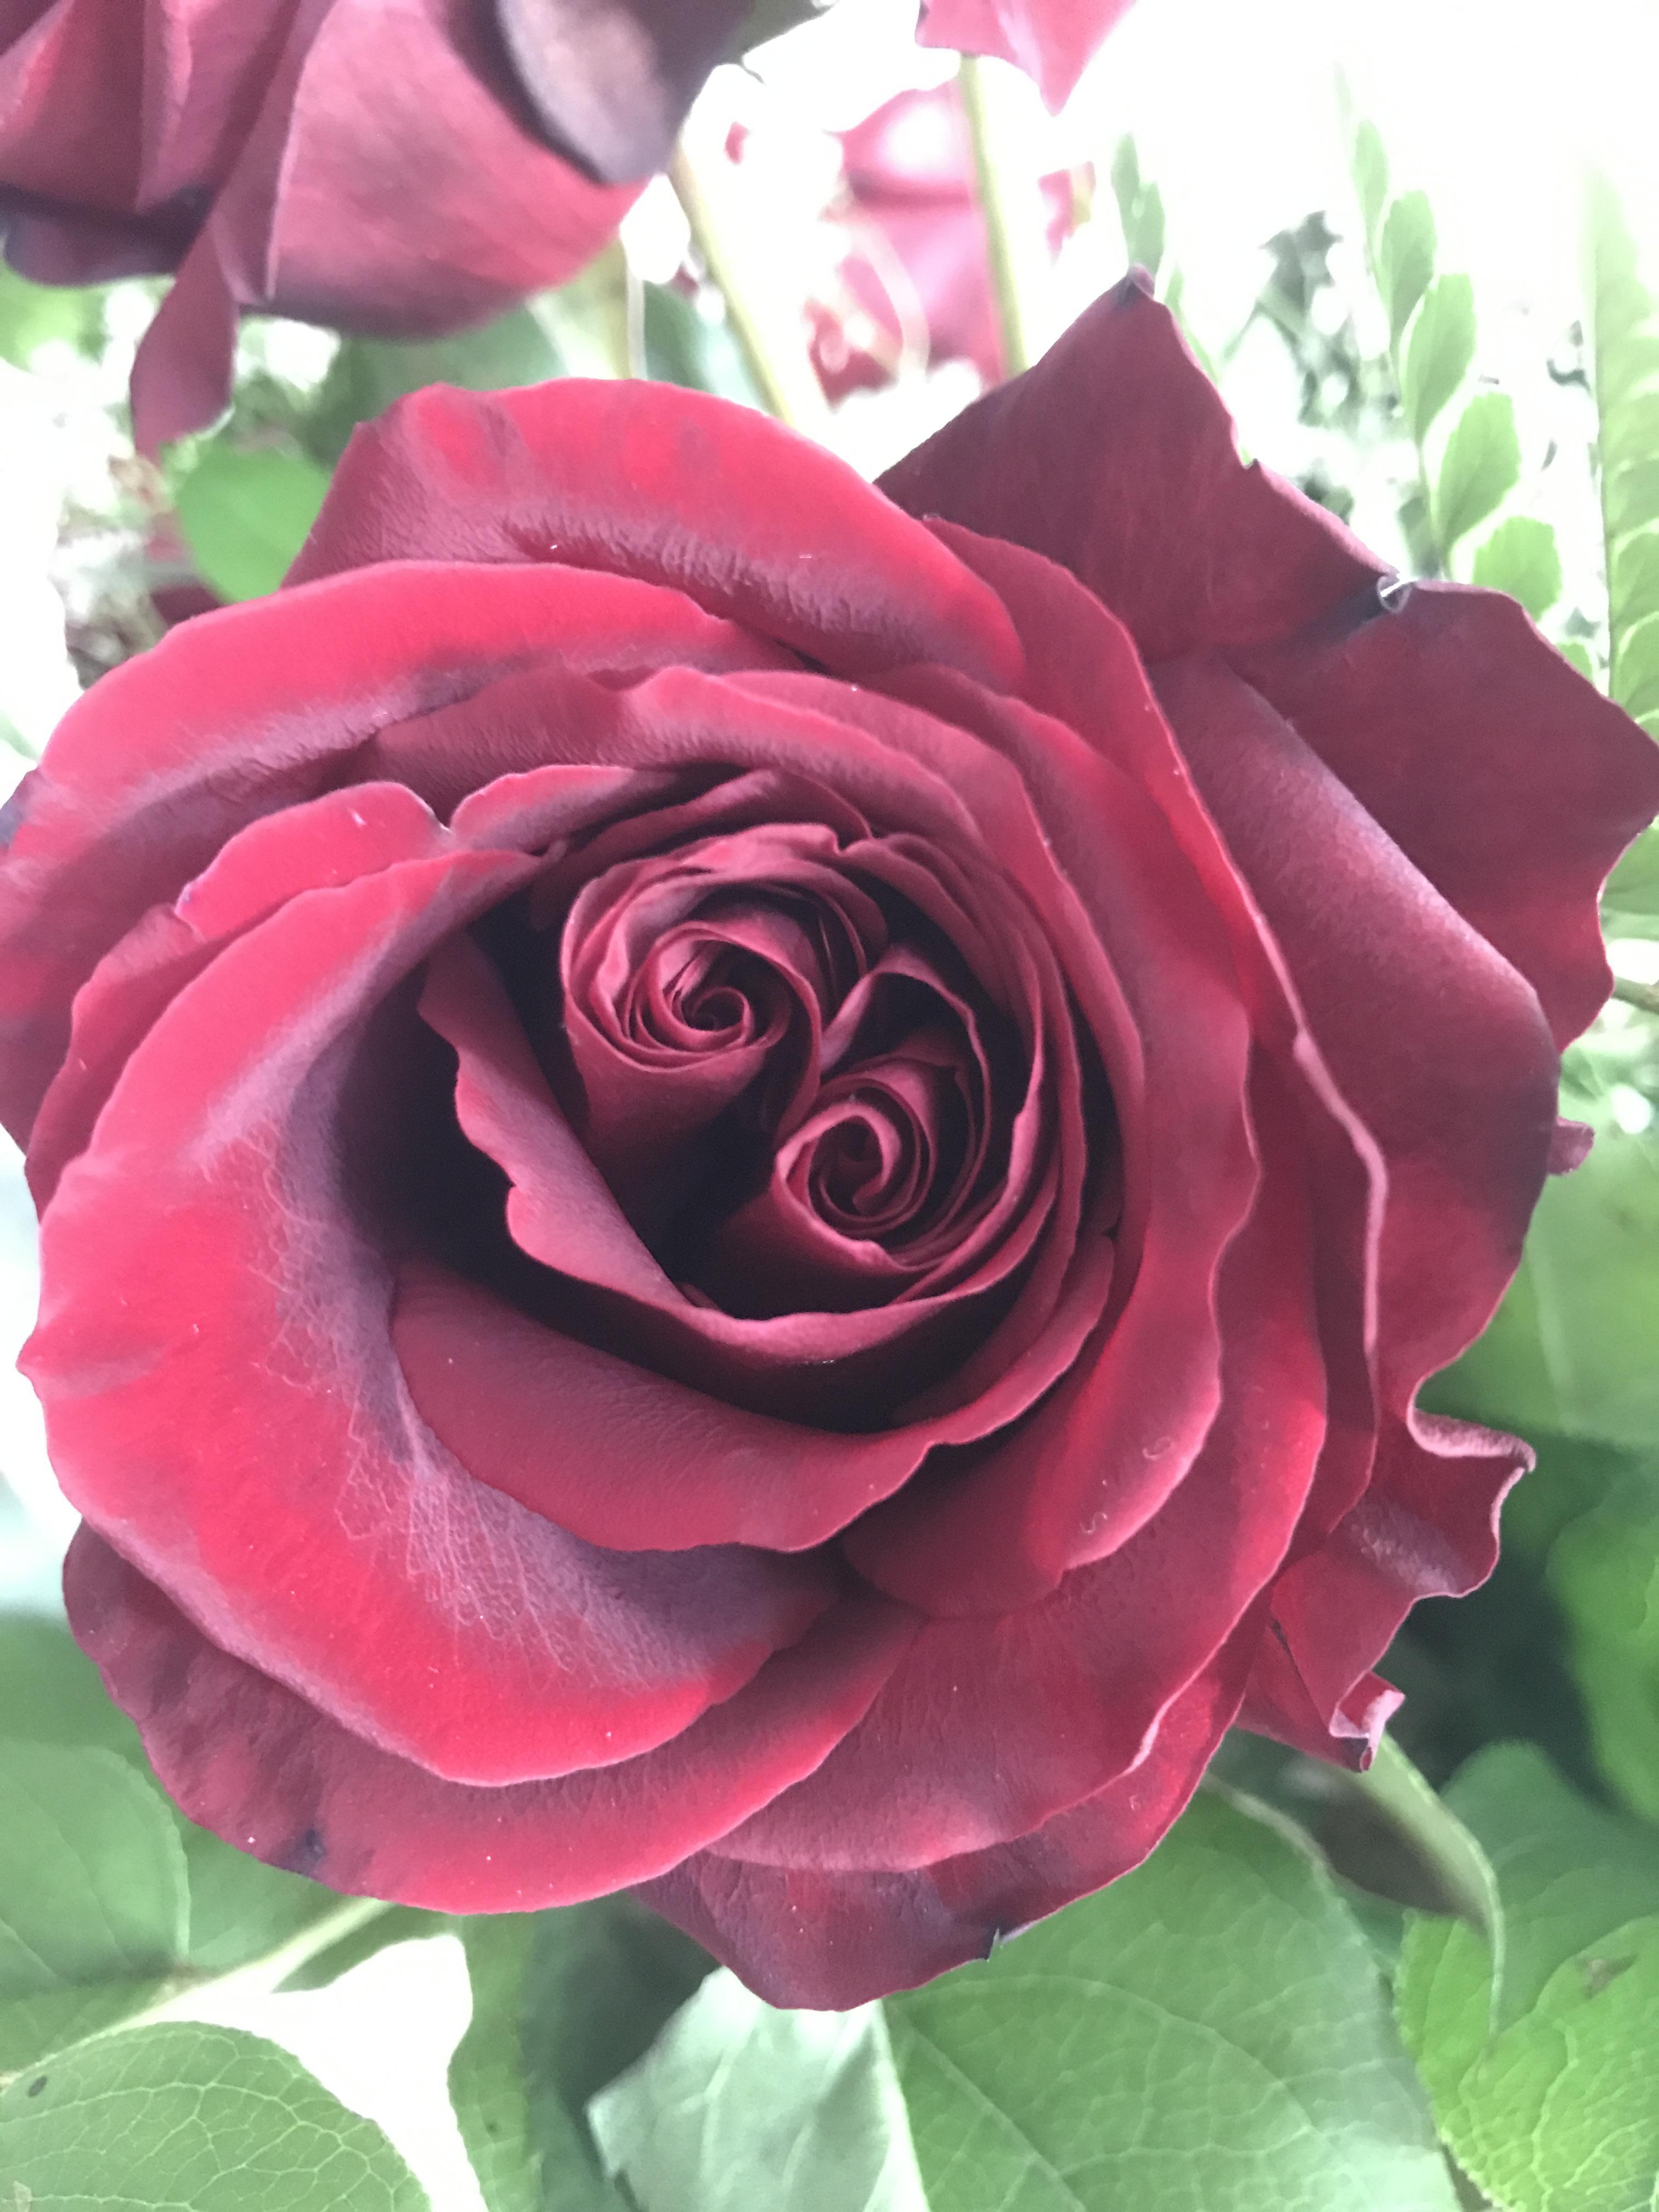 Came across a double spiral rose today - Album on Imgur